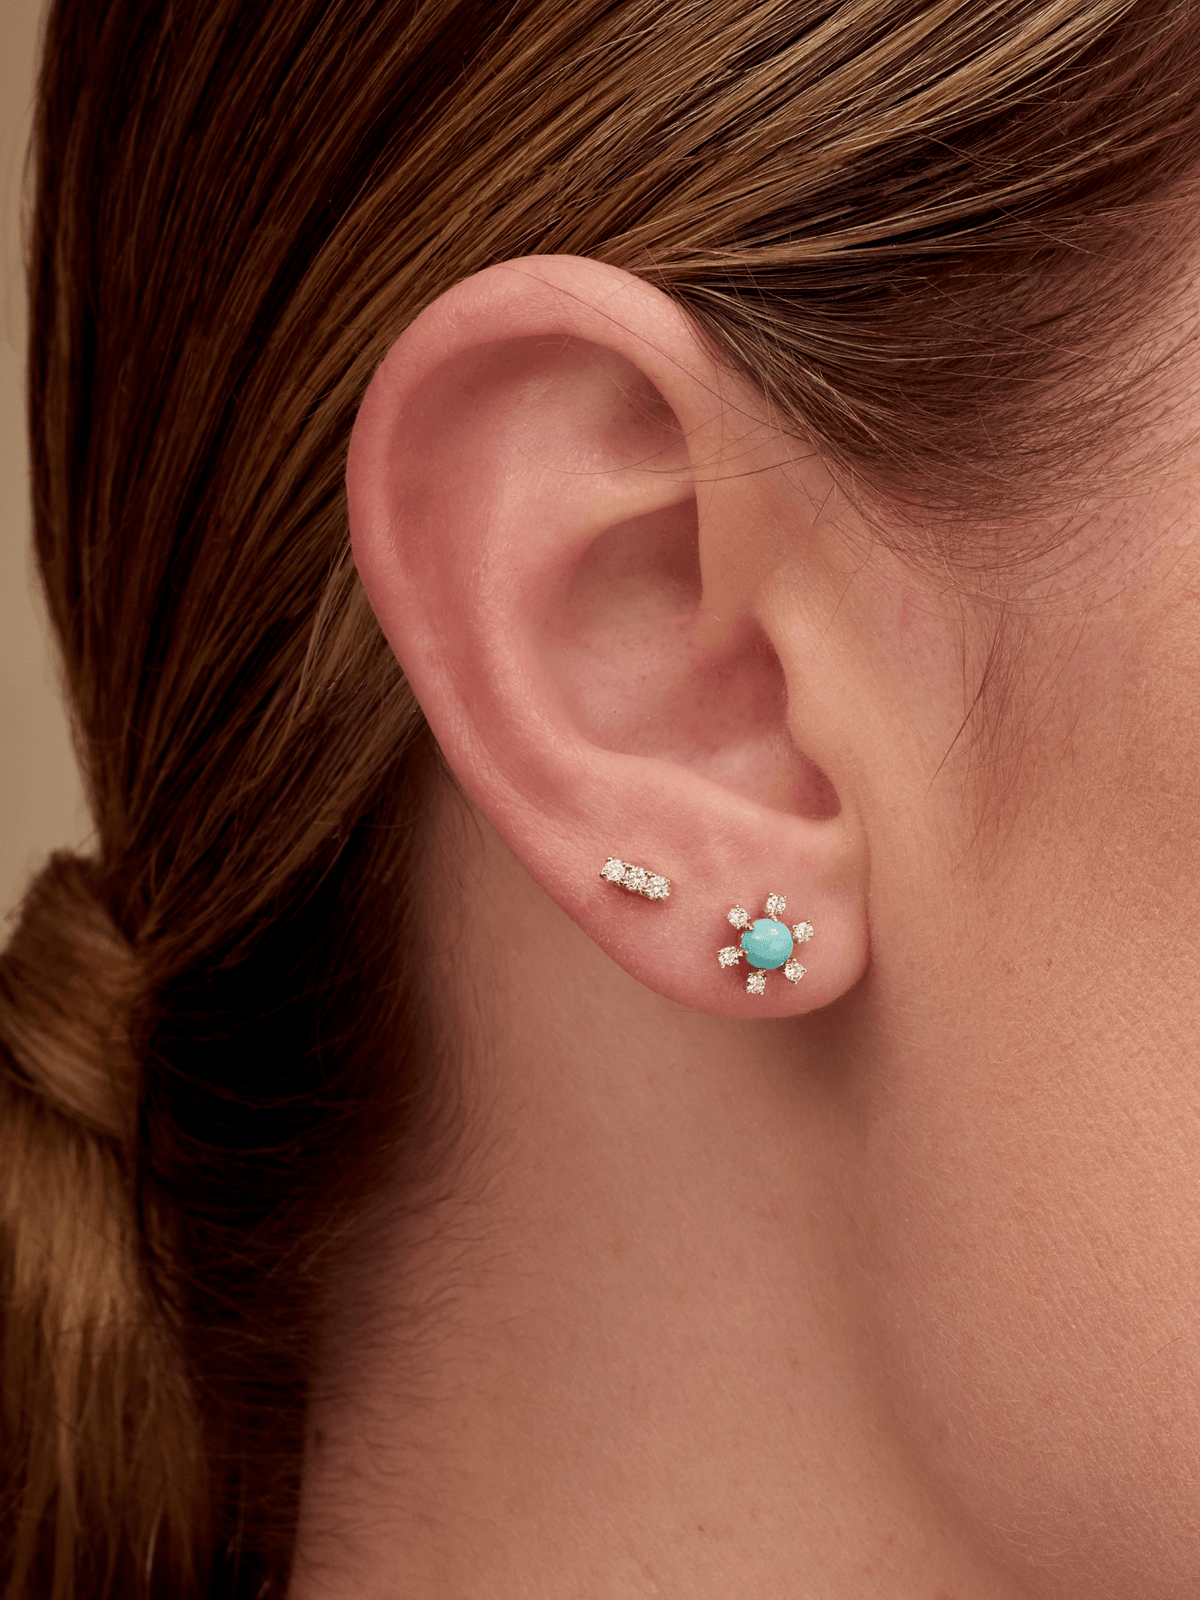 Turquoise earrings paired with diamond bar studs